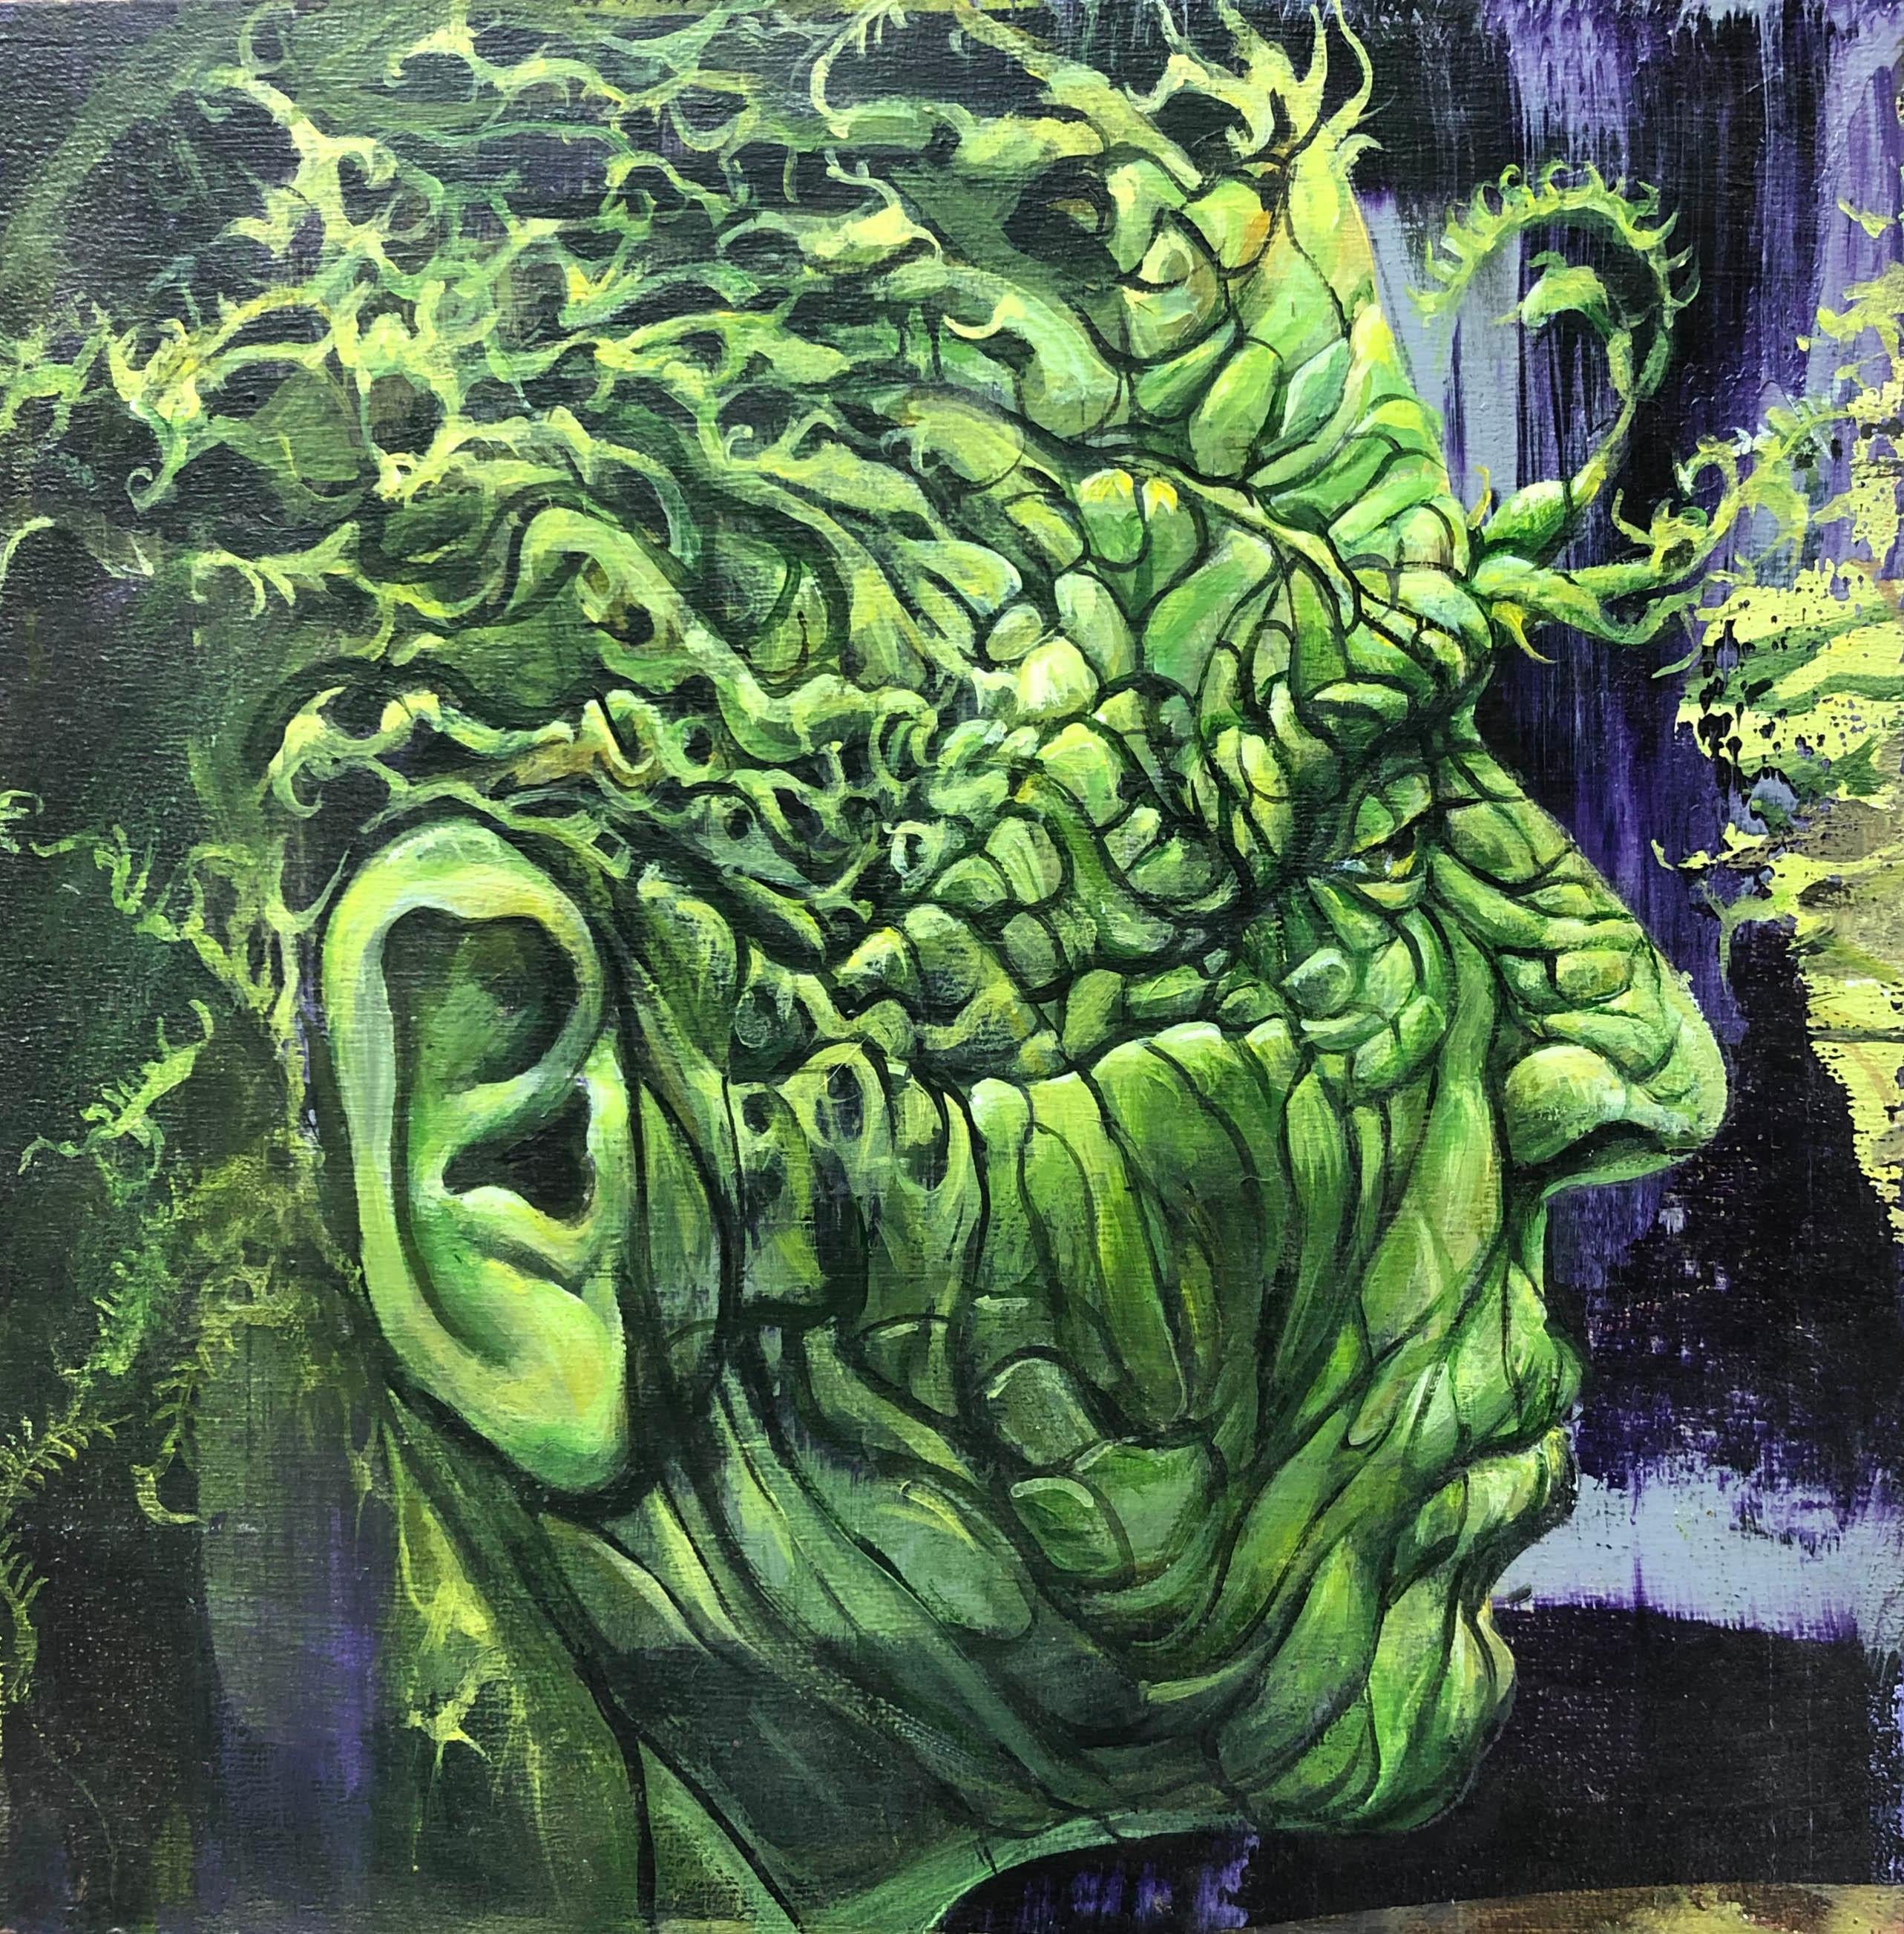 Green Man - Painting by Pamela Mower-Conner